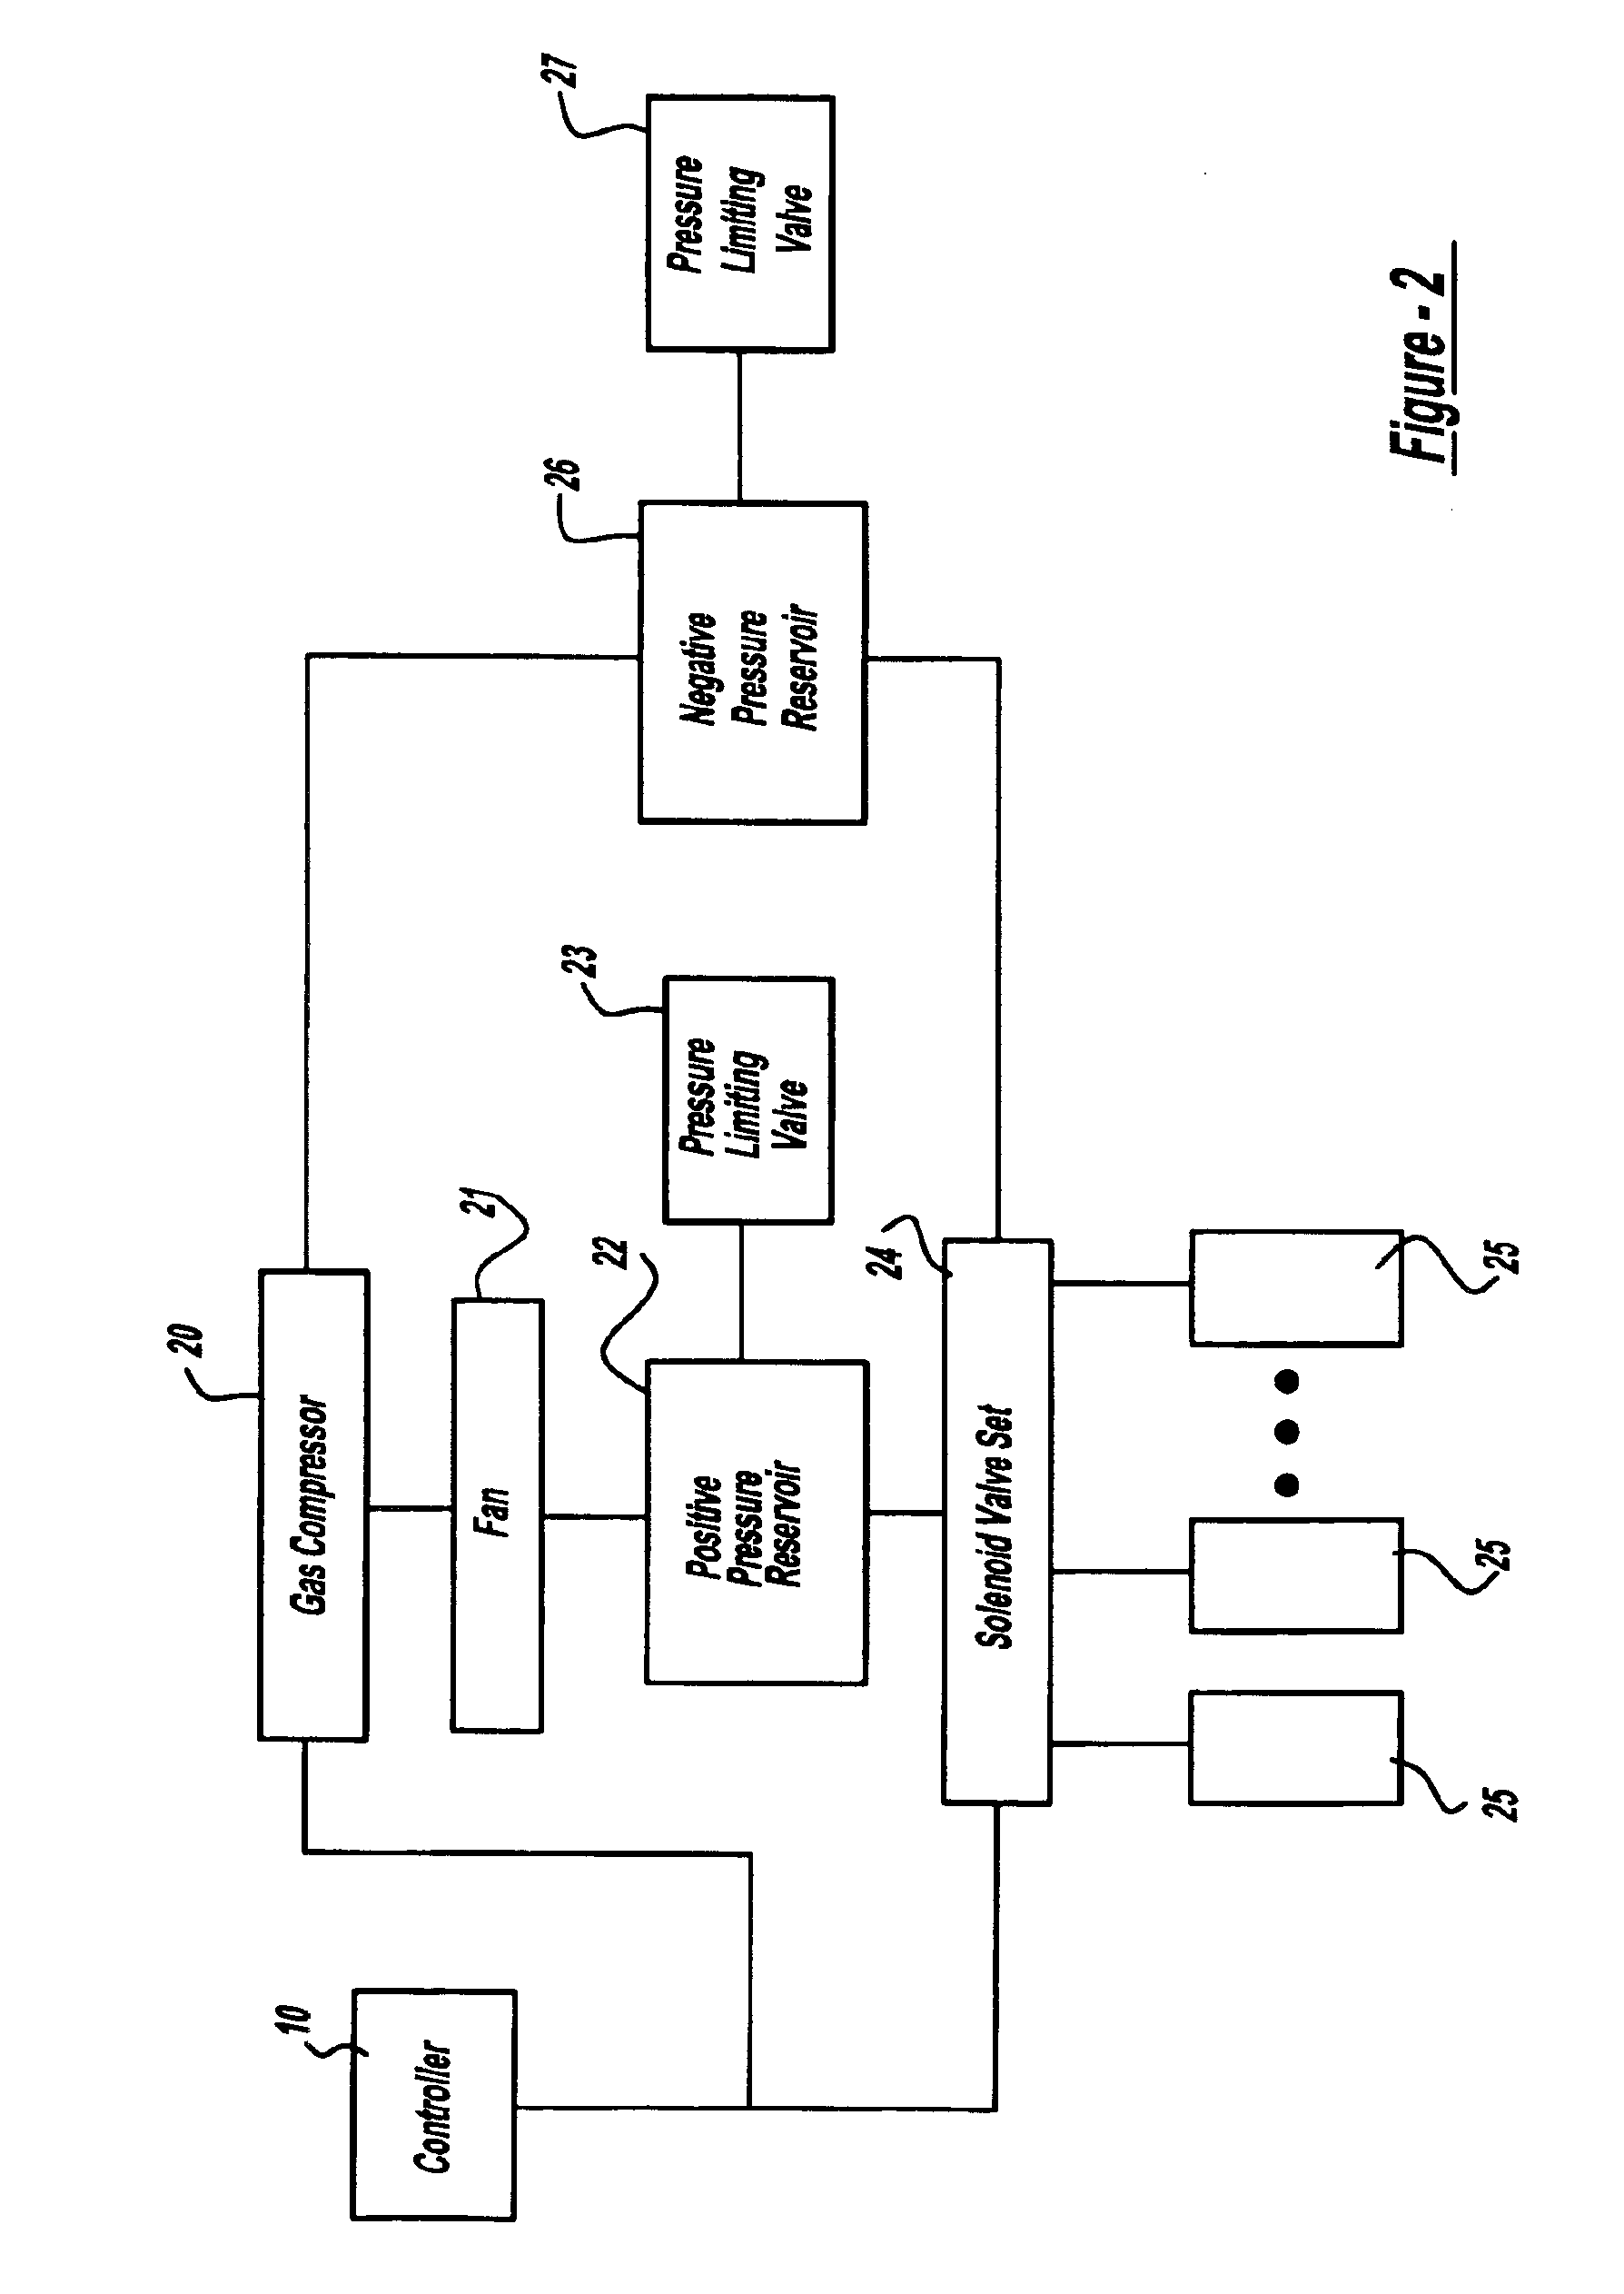 High efficiency external counterpulsation apparatus and method for controlling same